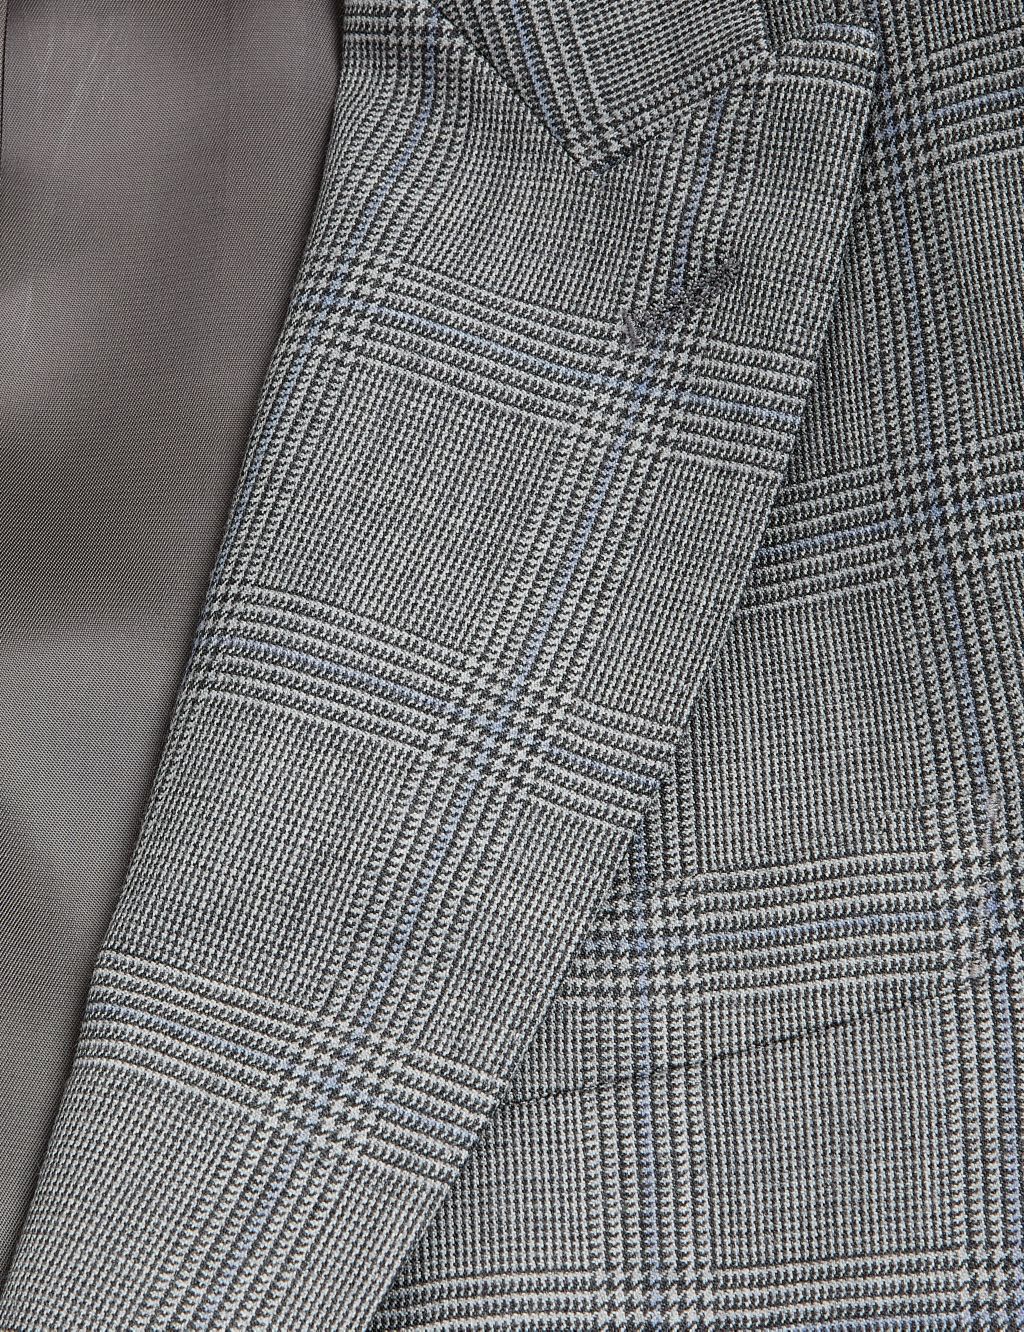 Regular Fit Pure Wool Check Suit Jacket image 7